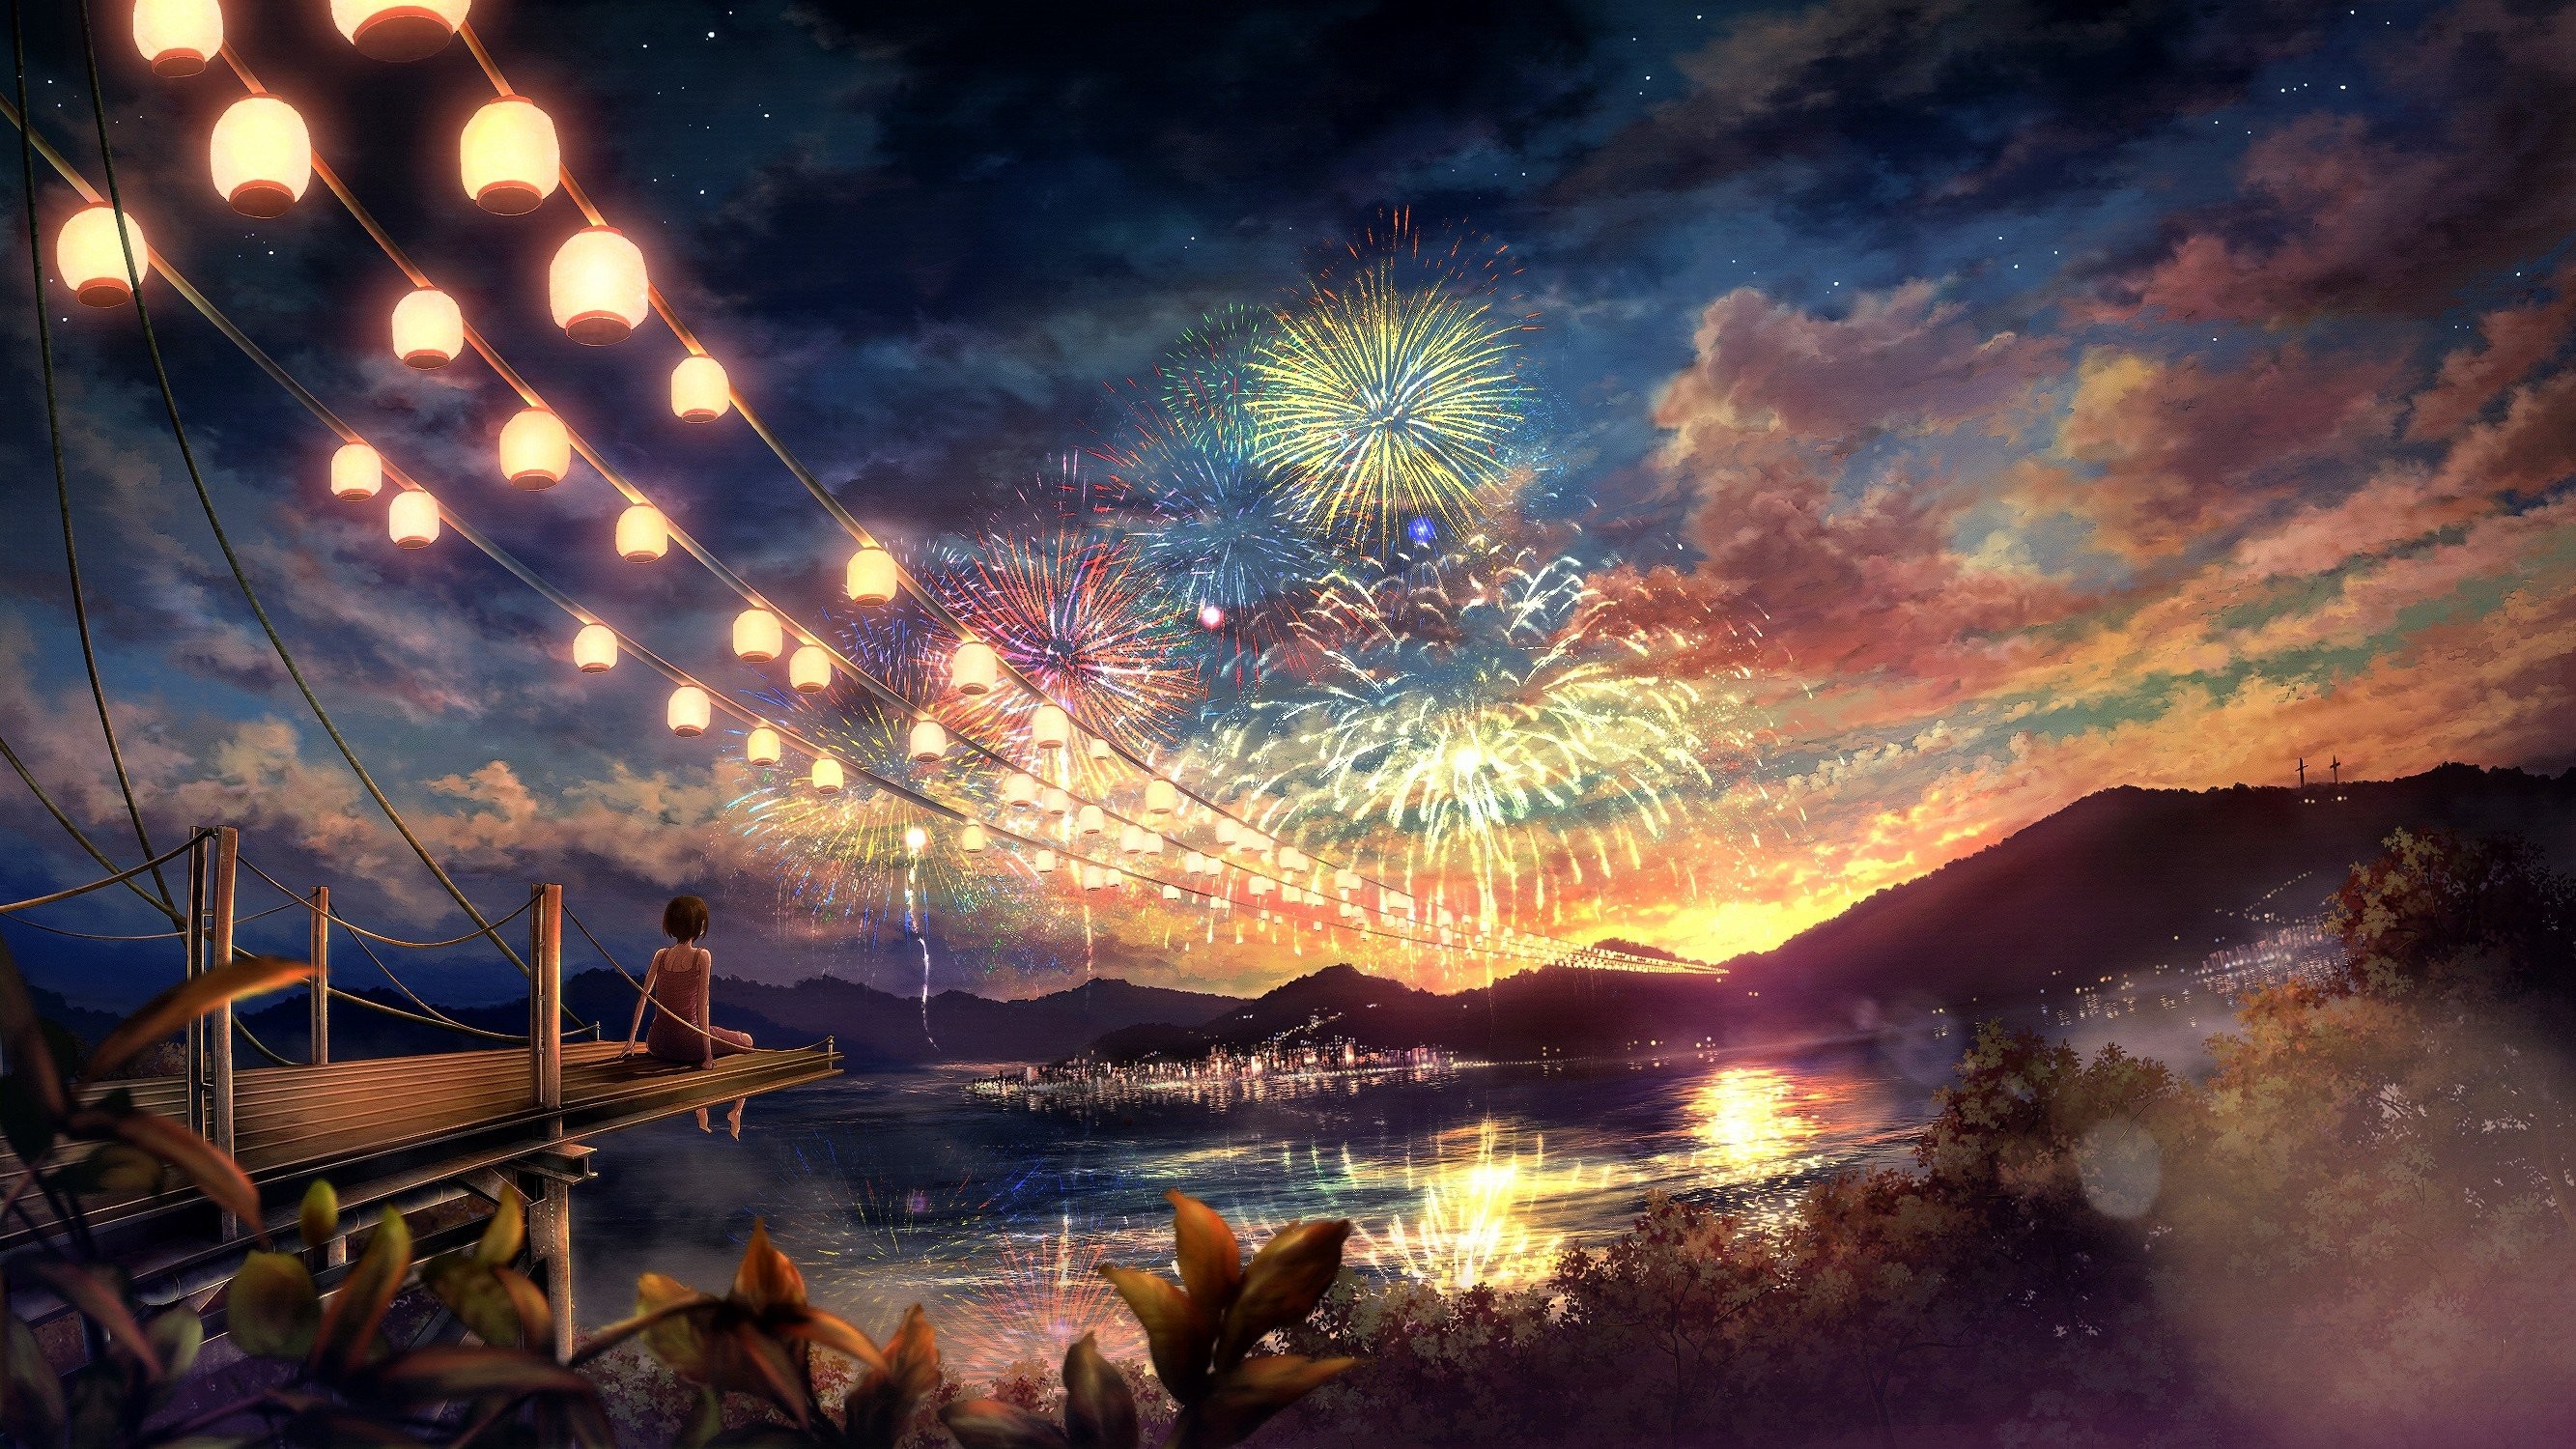 Night Anime Scenery High Quality Resolution Wallpapers High